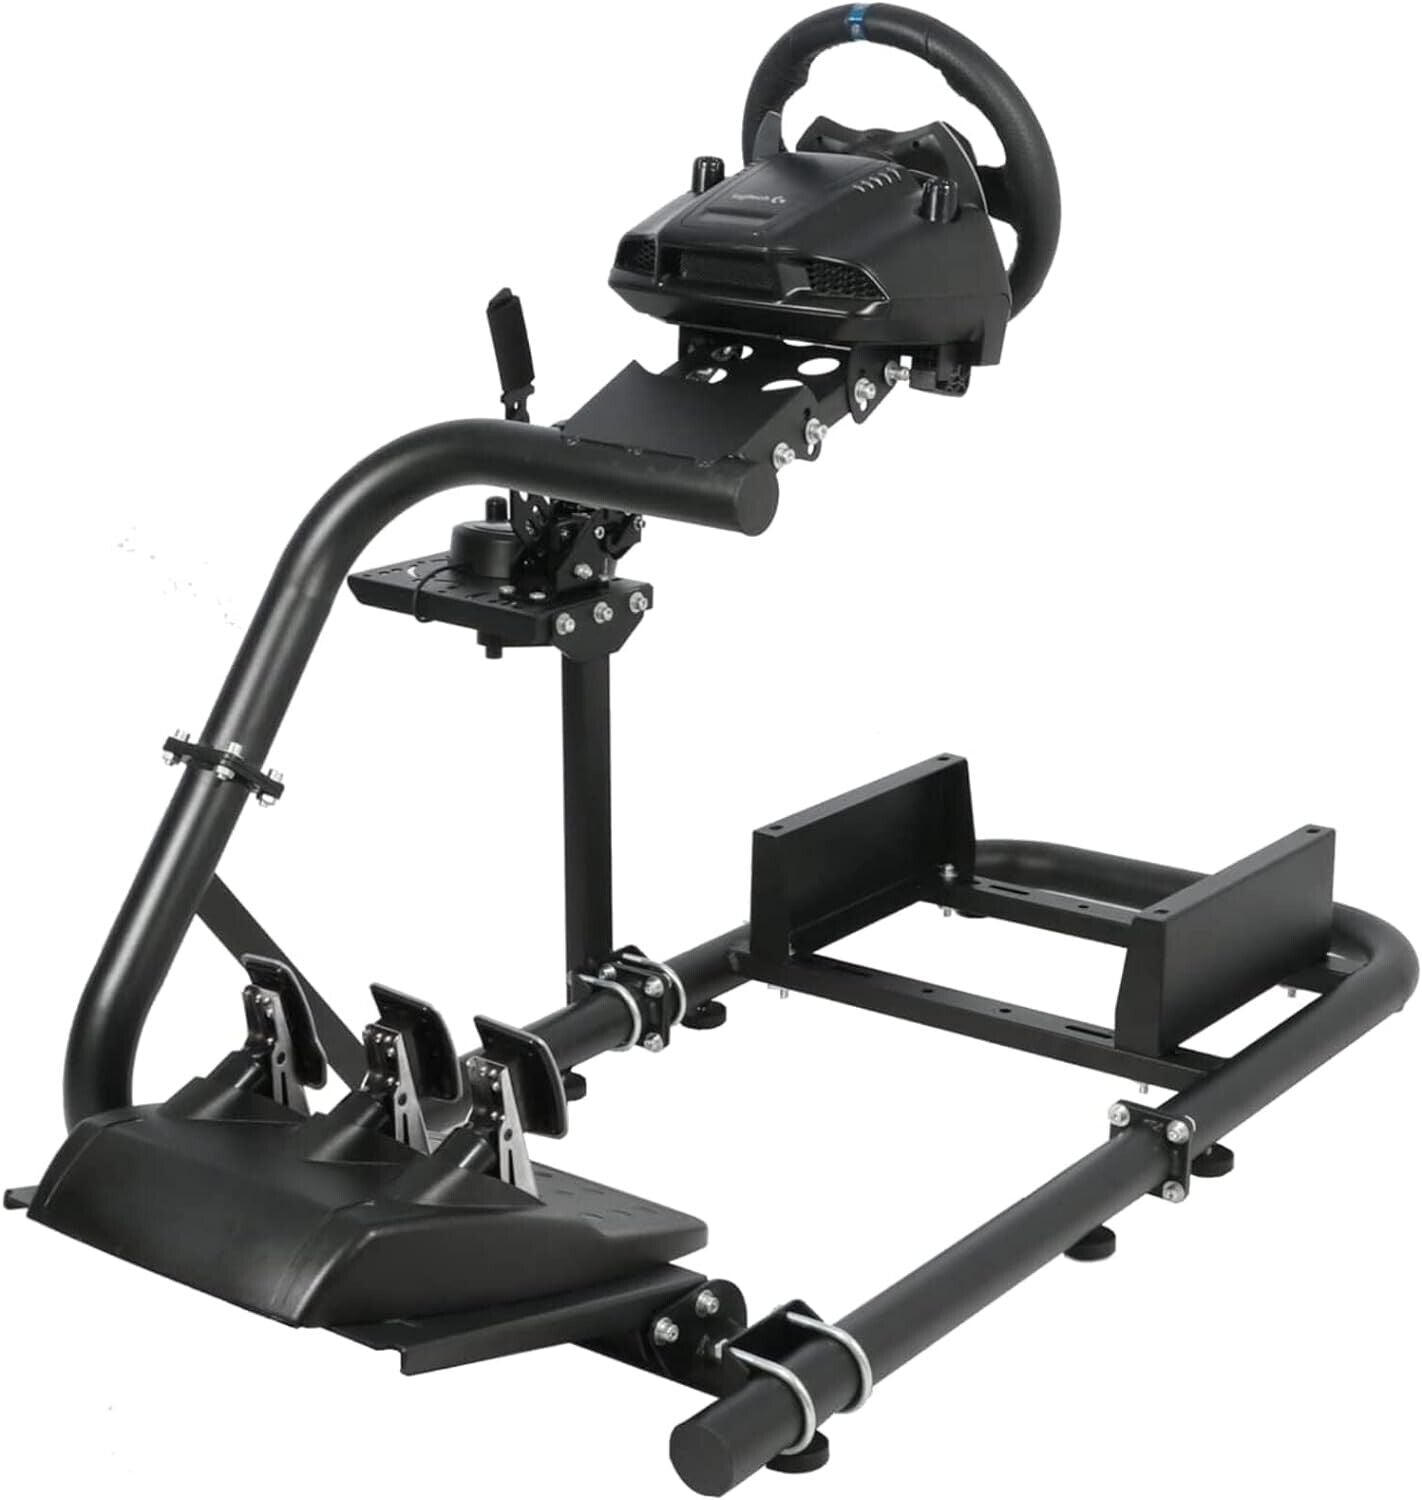 Driving Game Sim Racing Frame Rig - Add Seat Wheel Pedals Xbox PS PC Console F1